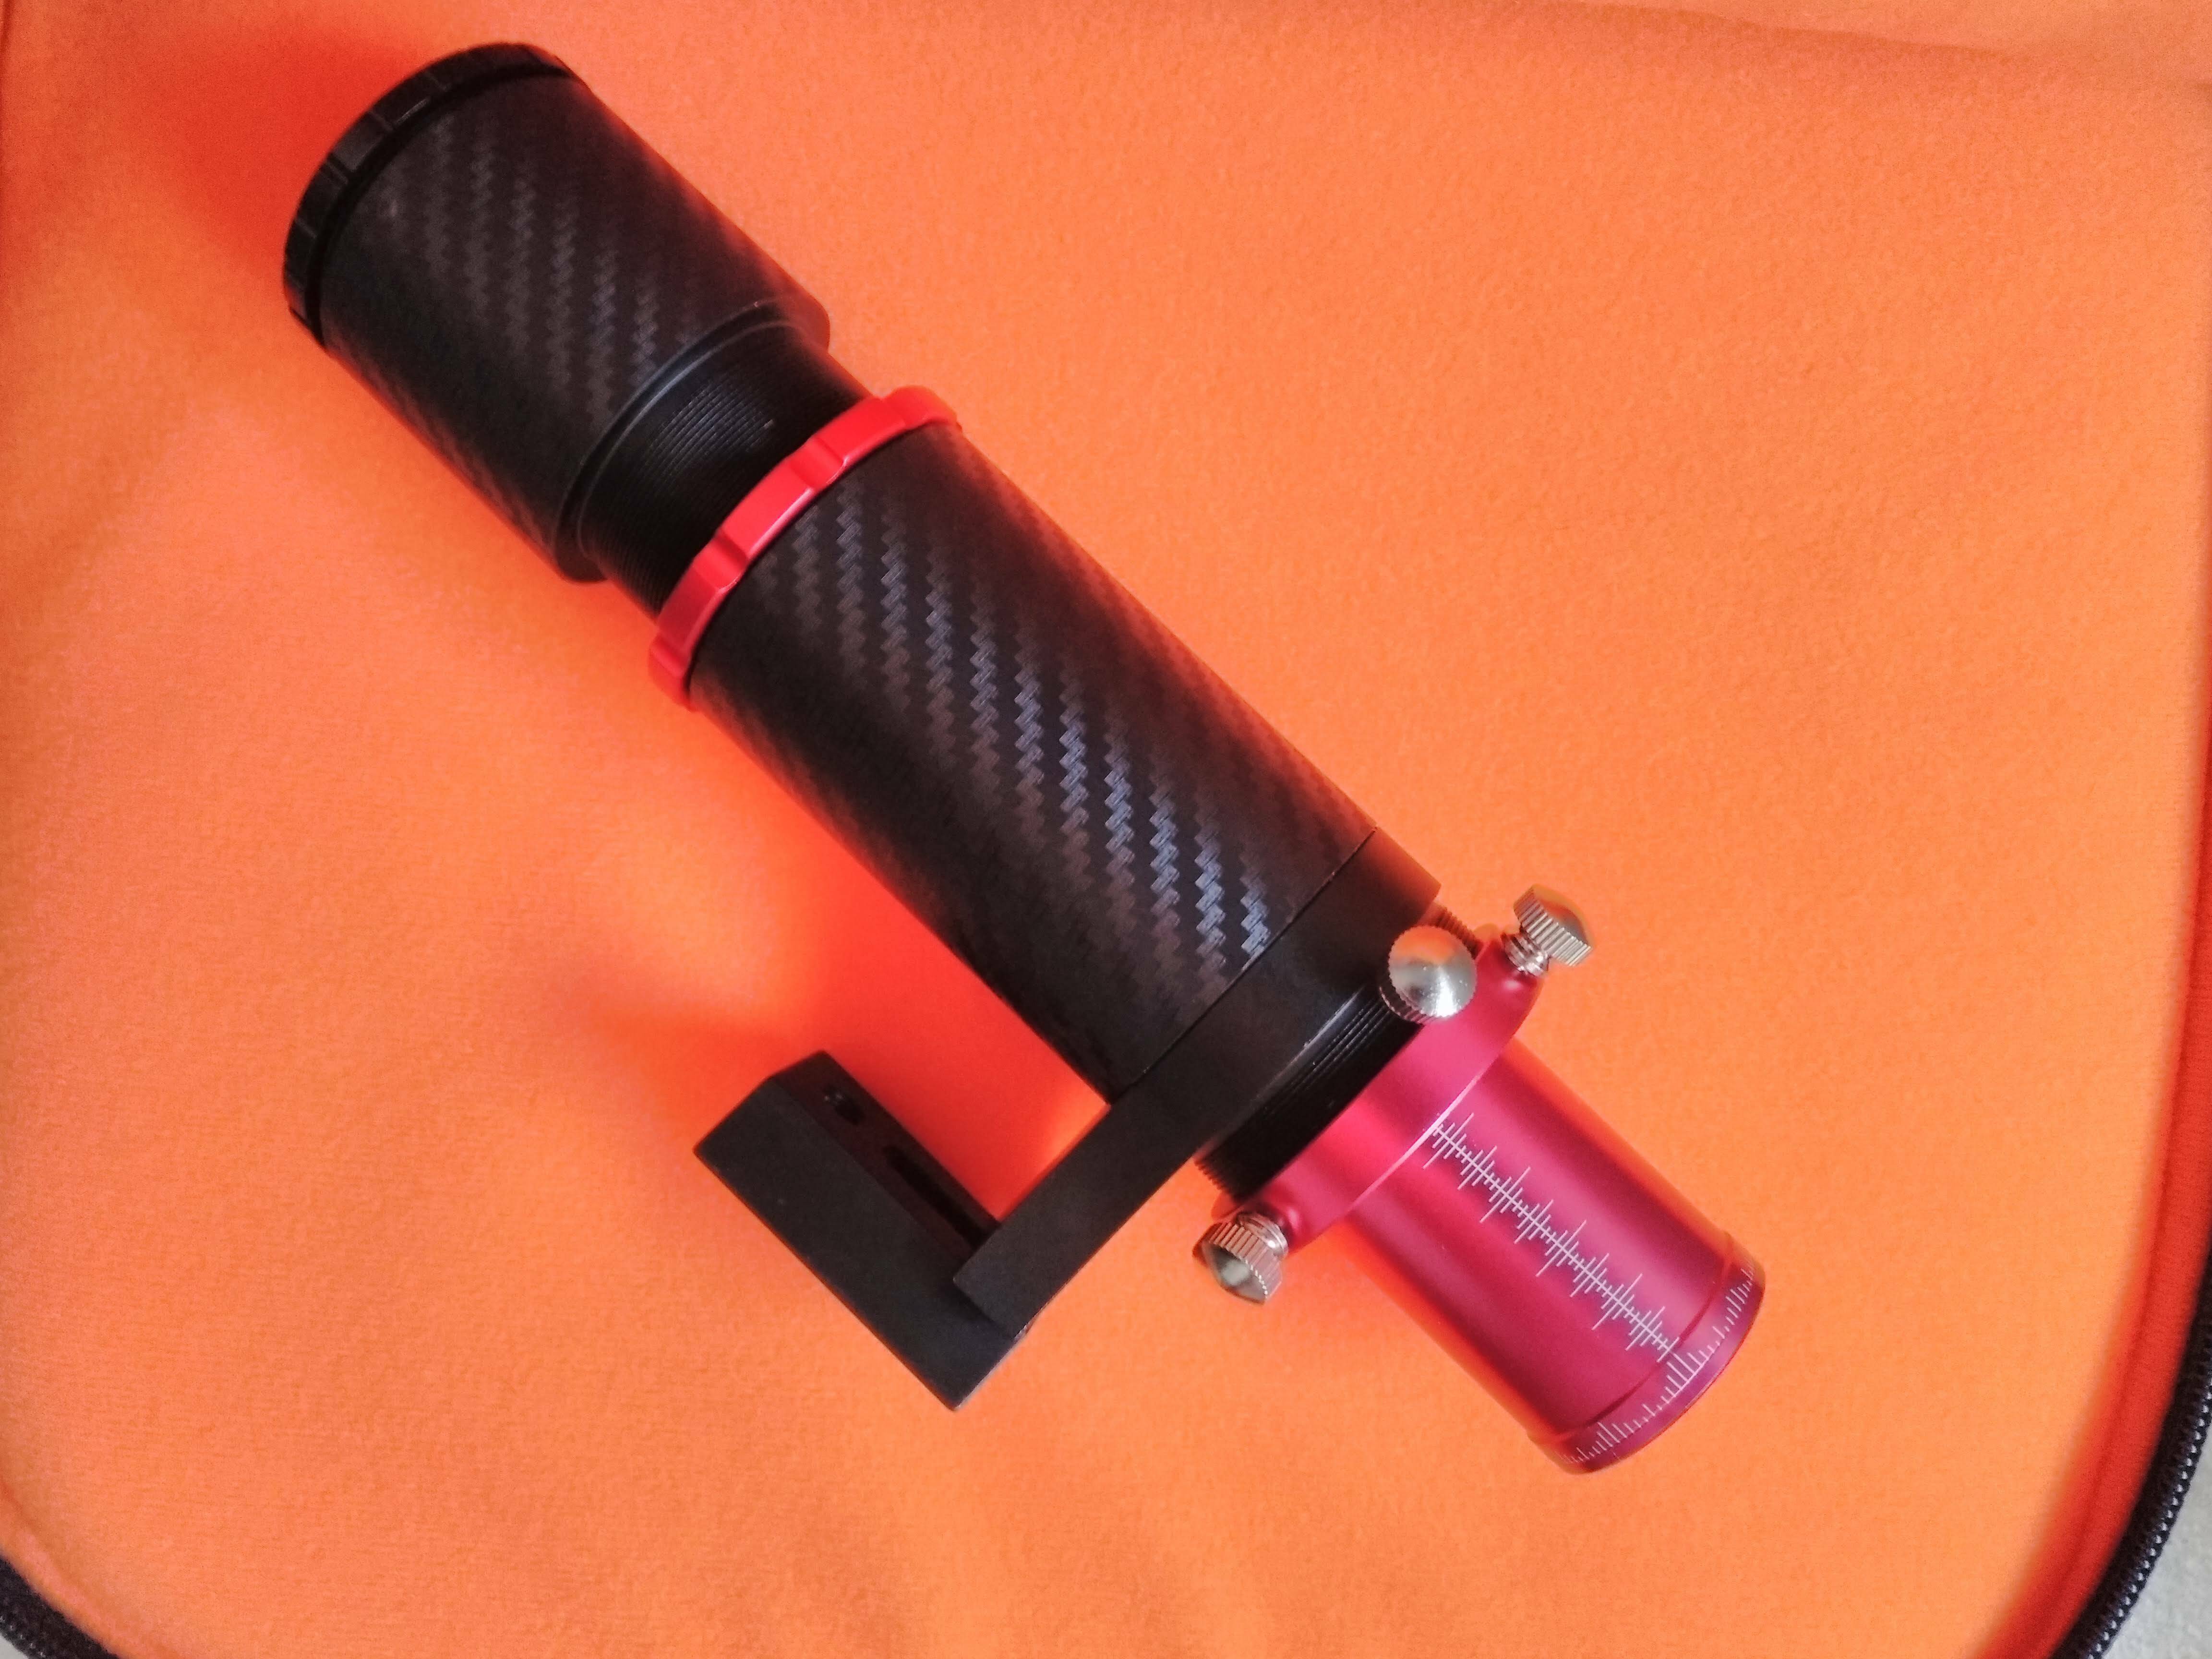 130mm guiding scope with guiding camera